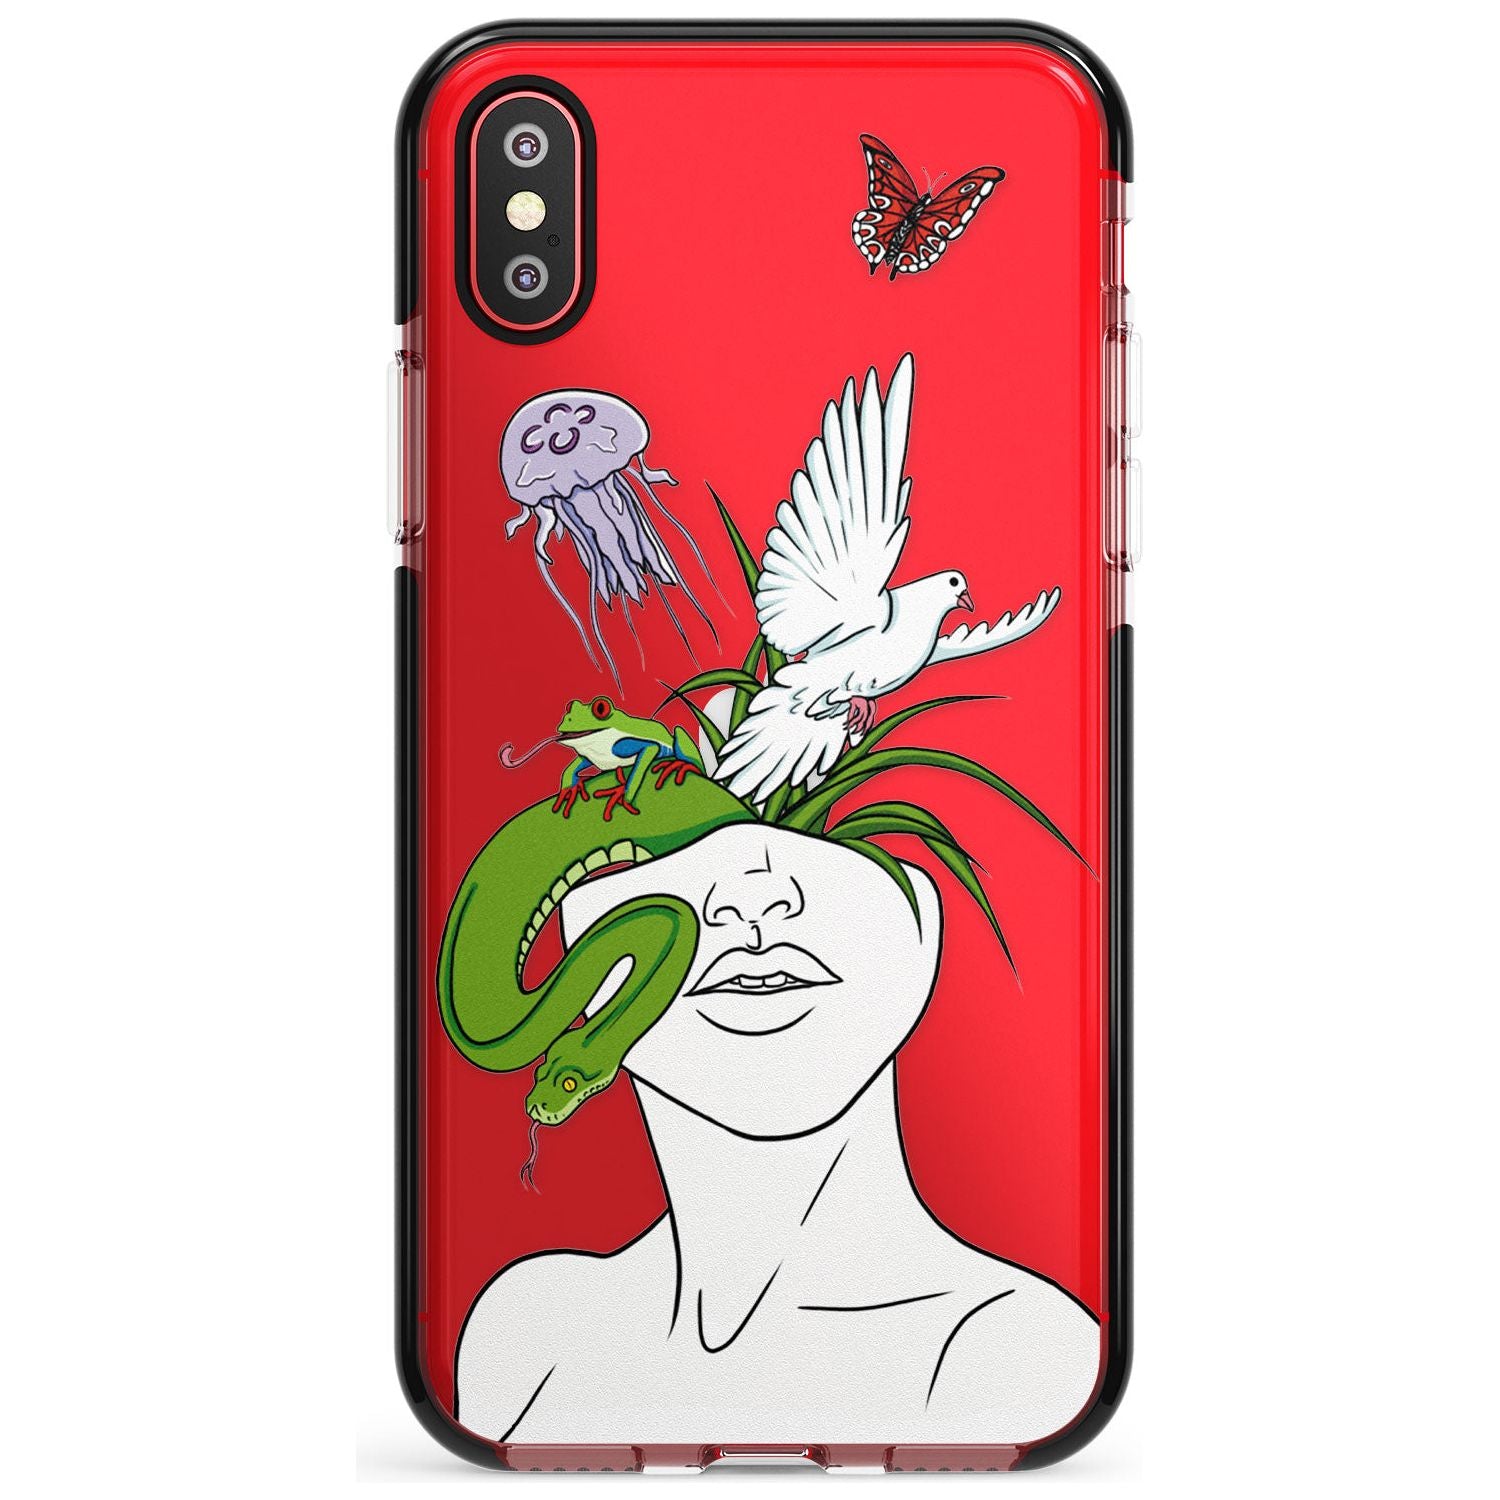 WILD THOUGHTS Pink Fade Impact Phone Case for iPhone X XS Max XR